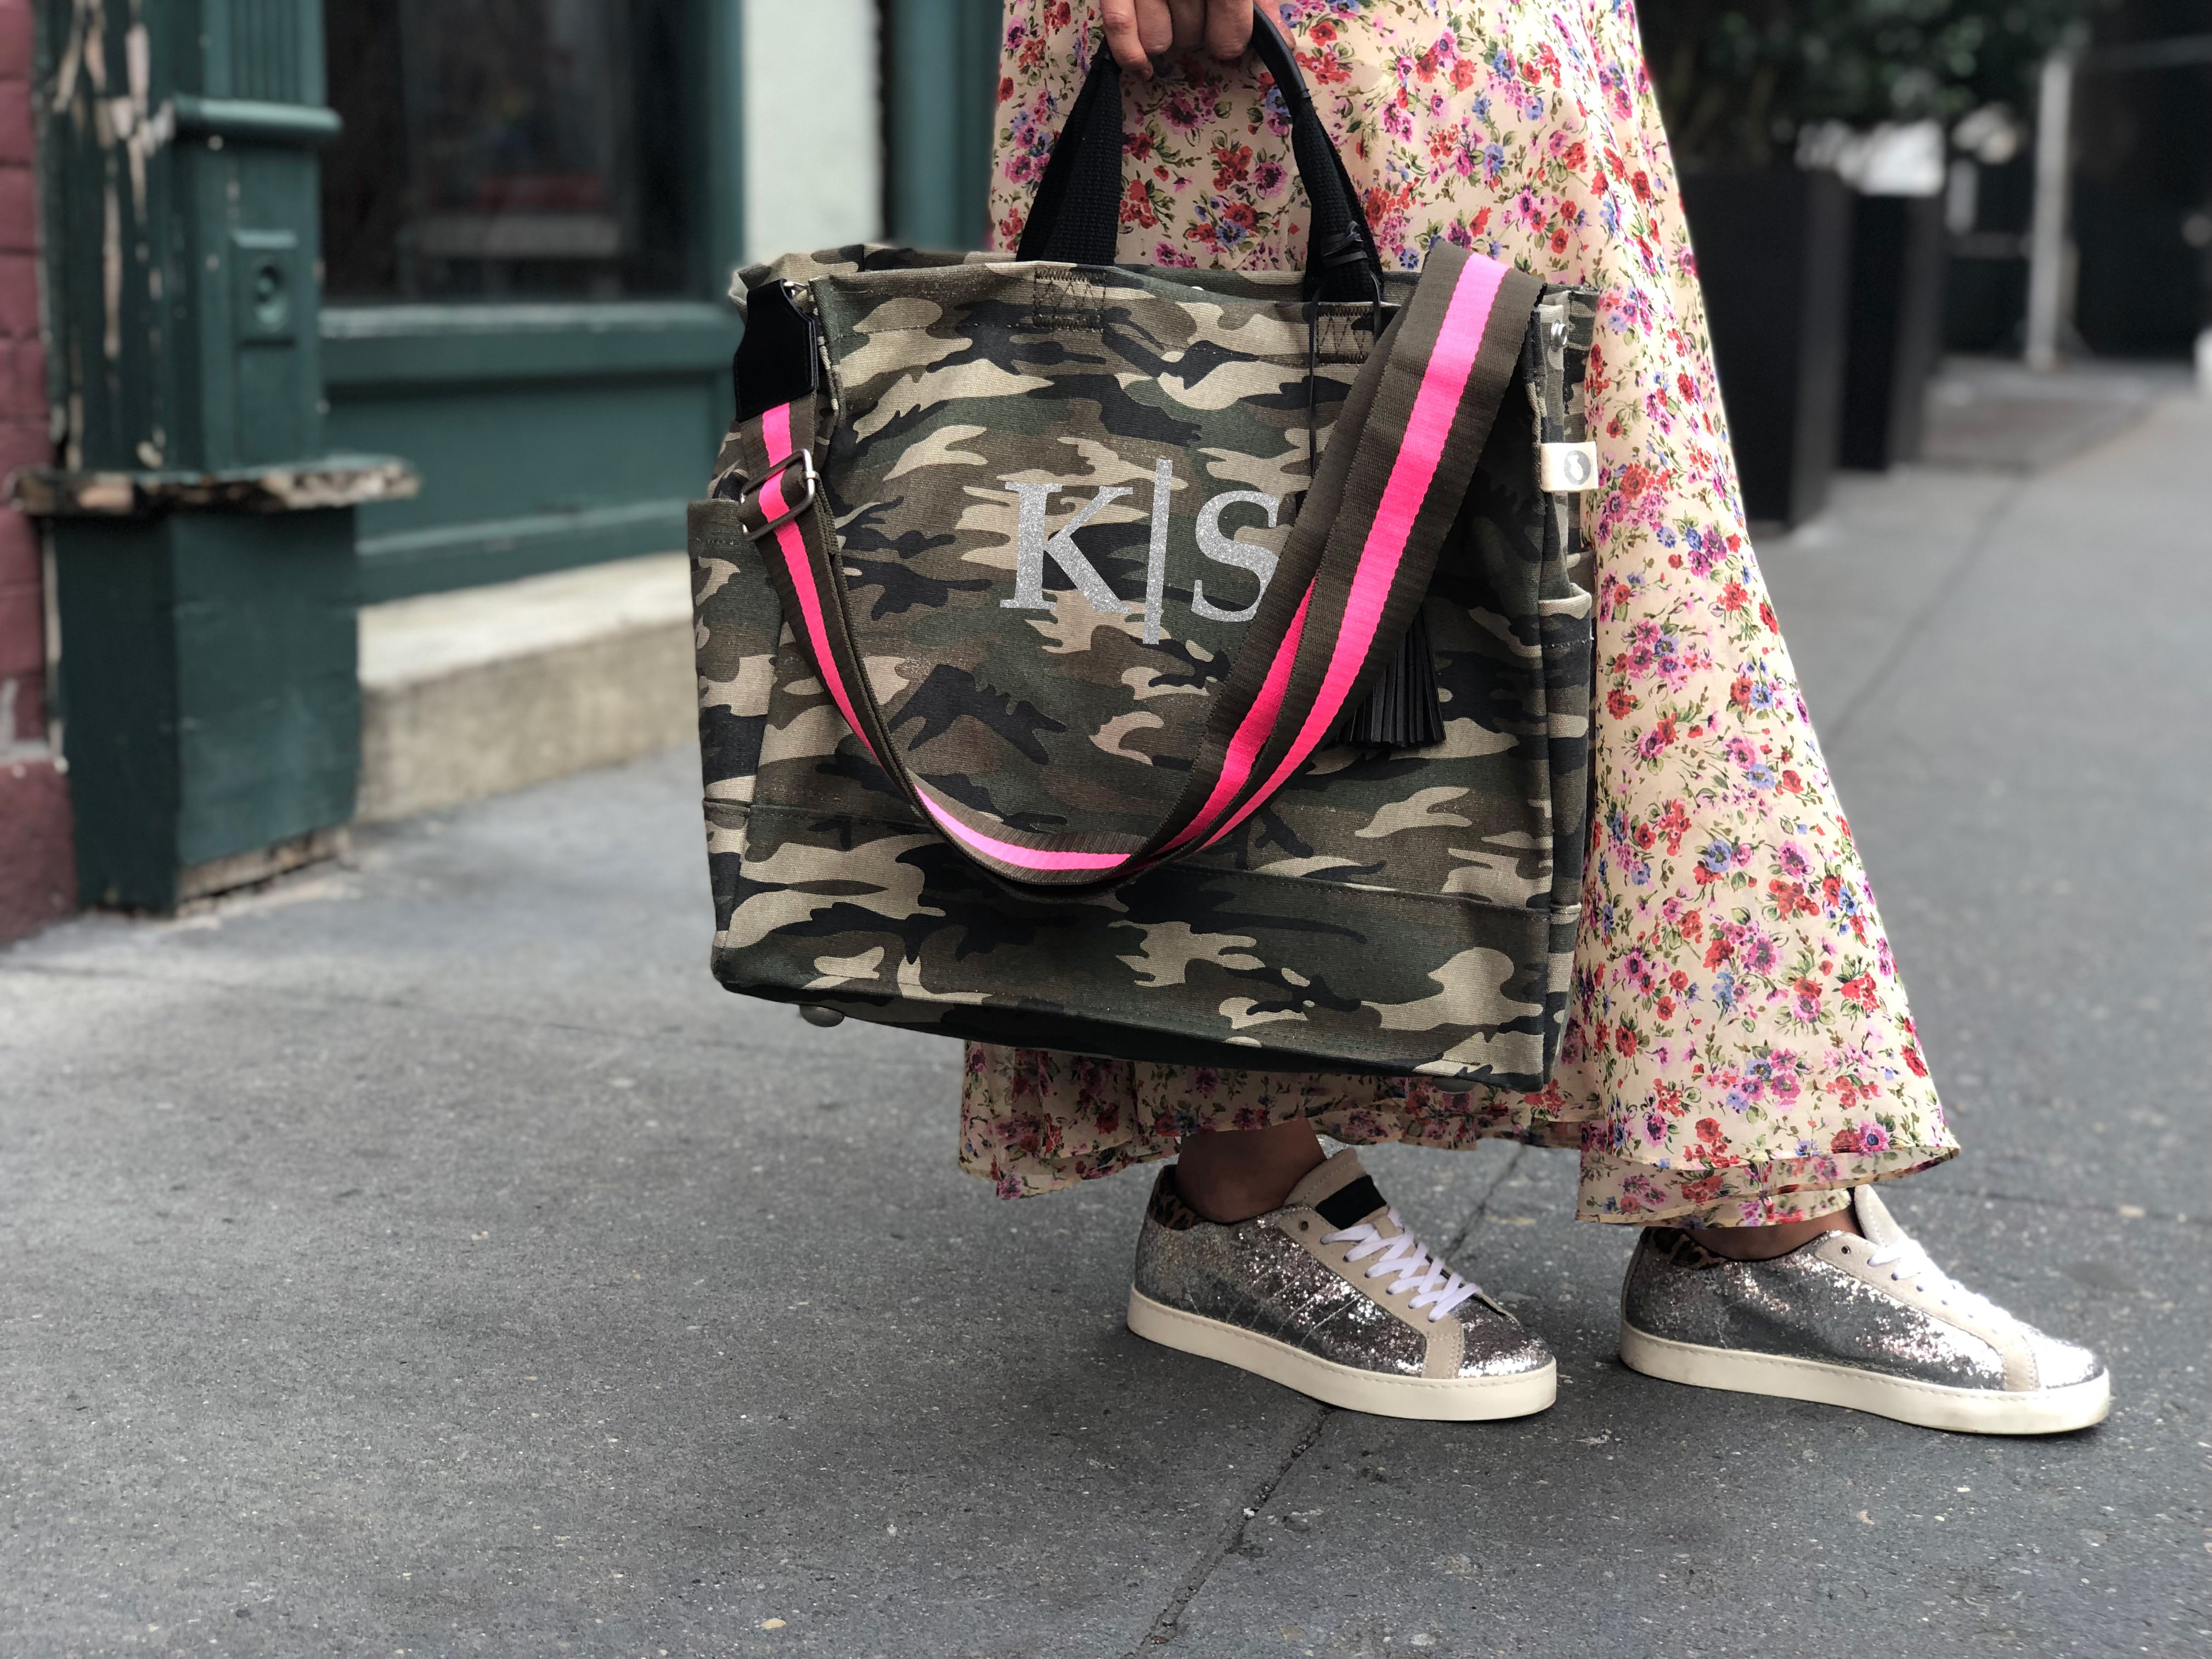 Split Letter Monogram Green Camo North South Bag with Stripe Strap - Quilted Koala